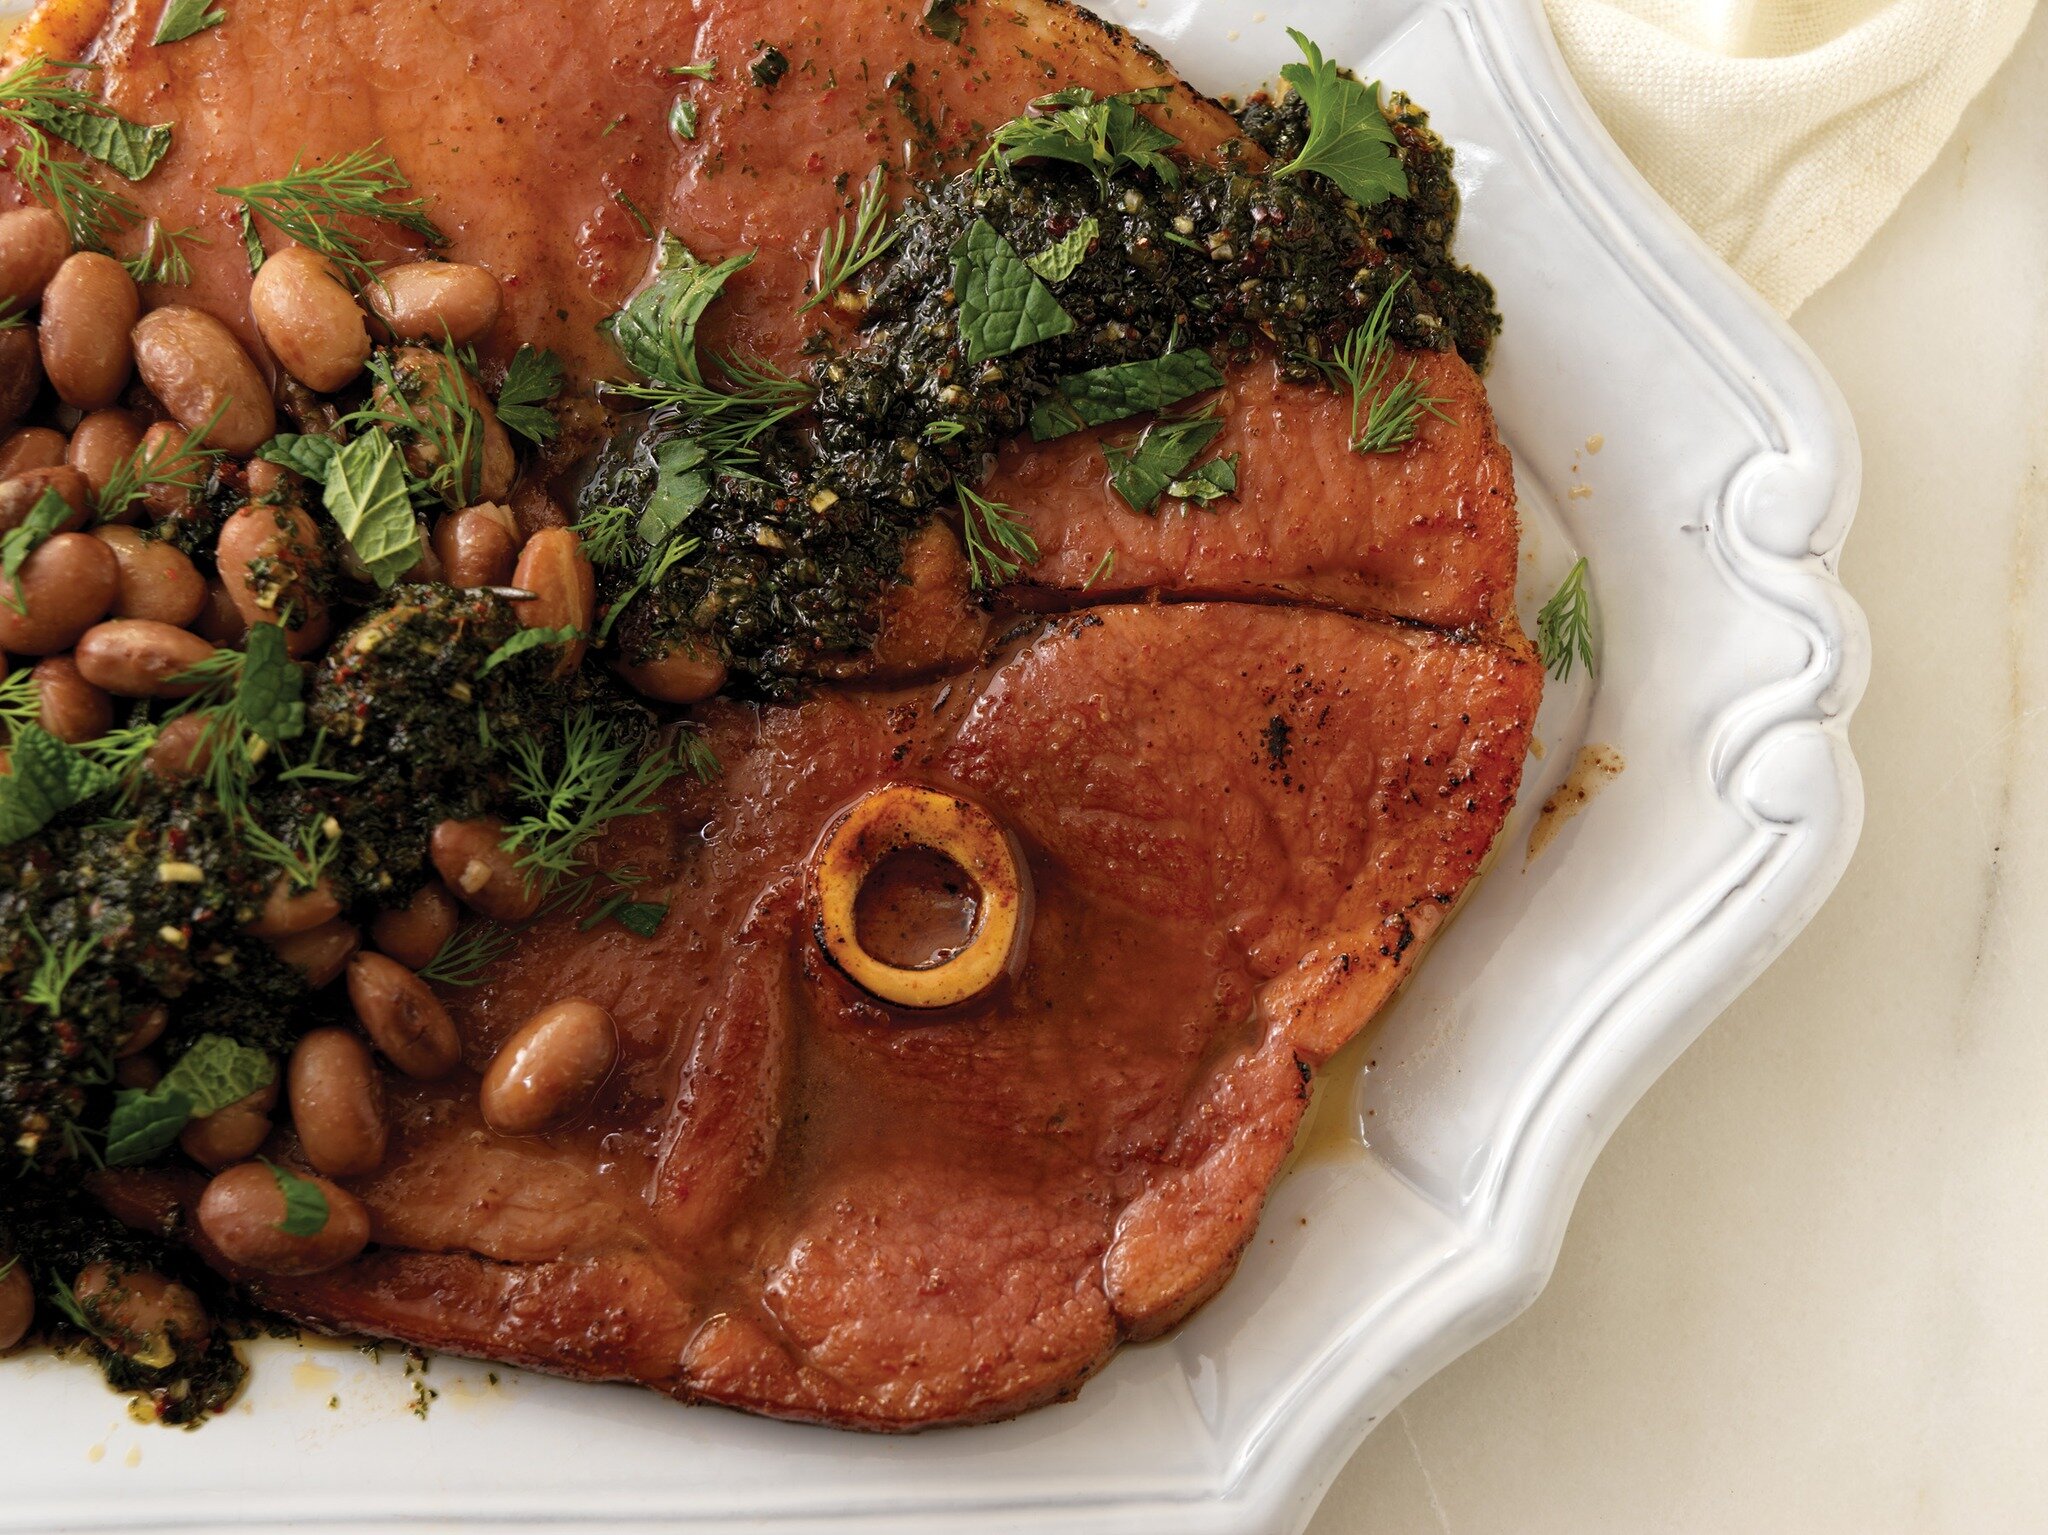 Don't have time to cook a whole ham? We've got you! These spiral ham steaks with shelling beans and a charred herb vinaigrette can be ready in 35 minutes. Not only is the presentation impeccable, but the flavor is also heavenly. 😍 

Check out our st